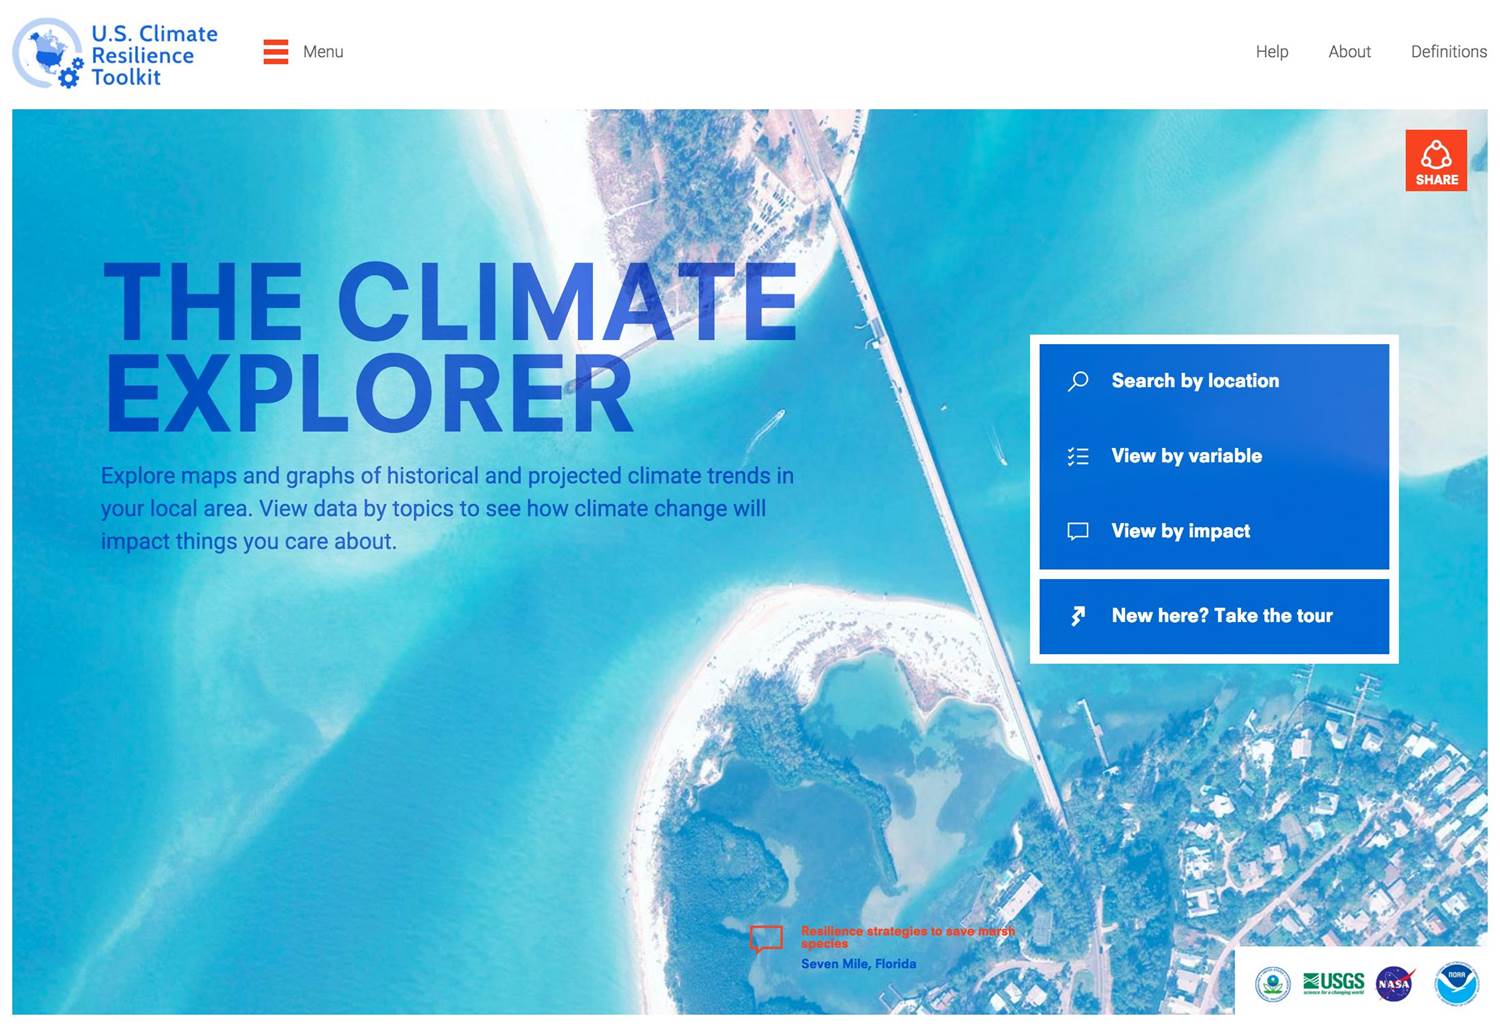 The Climate Explorer tool lets users explore maps and graphs of historical and projected climate trends down to the county level.